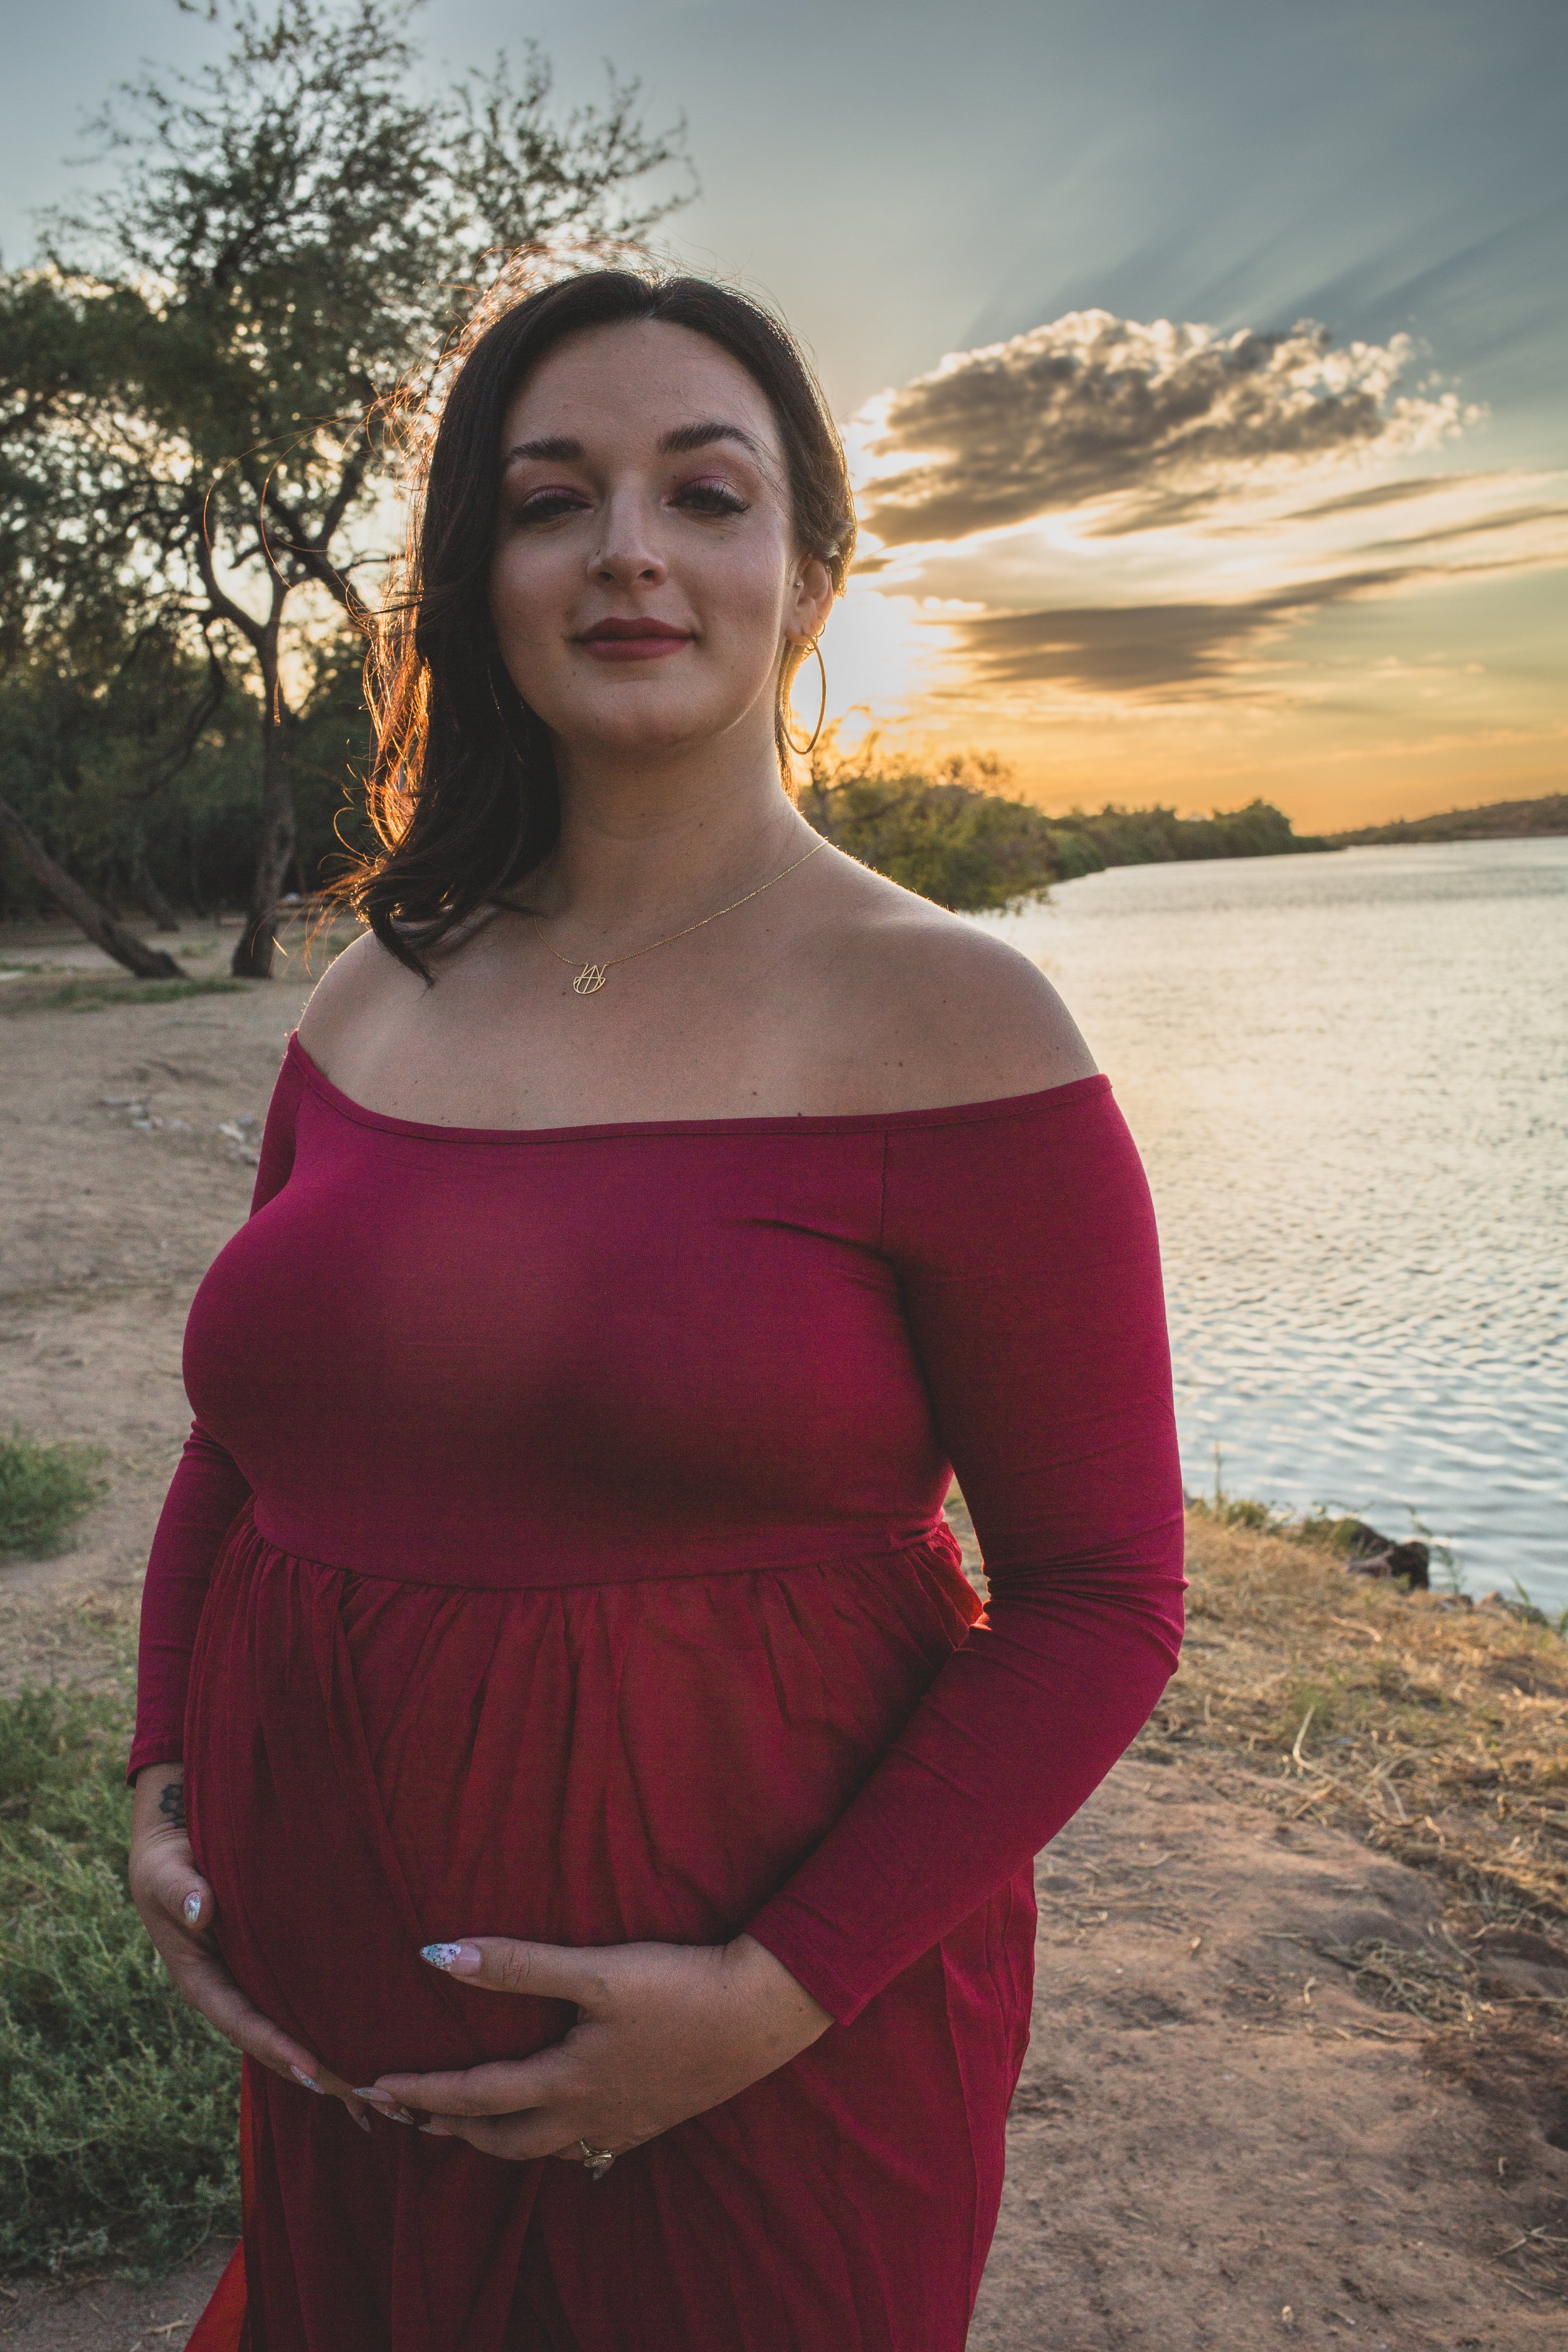 Mother-to-be's poses with her pregnant belly in a red dress at Sunset for maternity photos in front of the Salt River by Phoenix maternity photographer in Arizona; Jennifer Lind Schutsky.